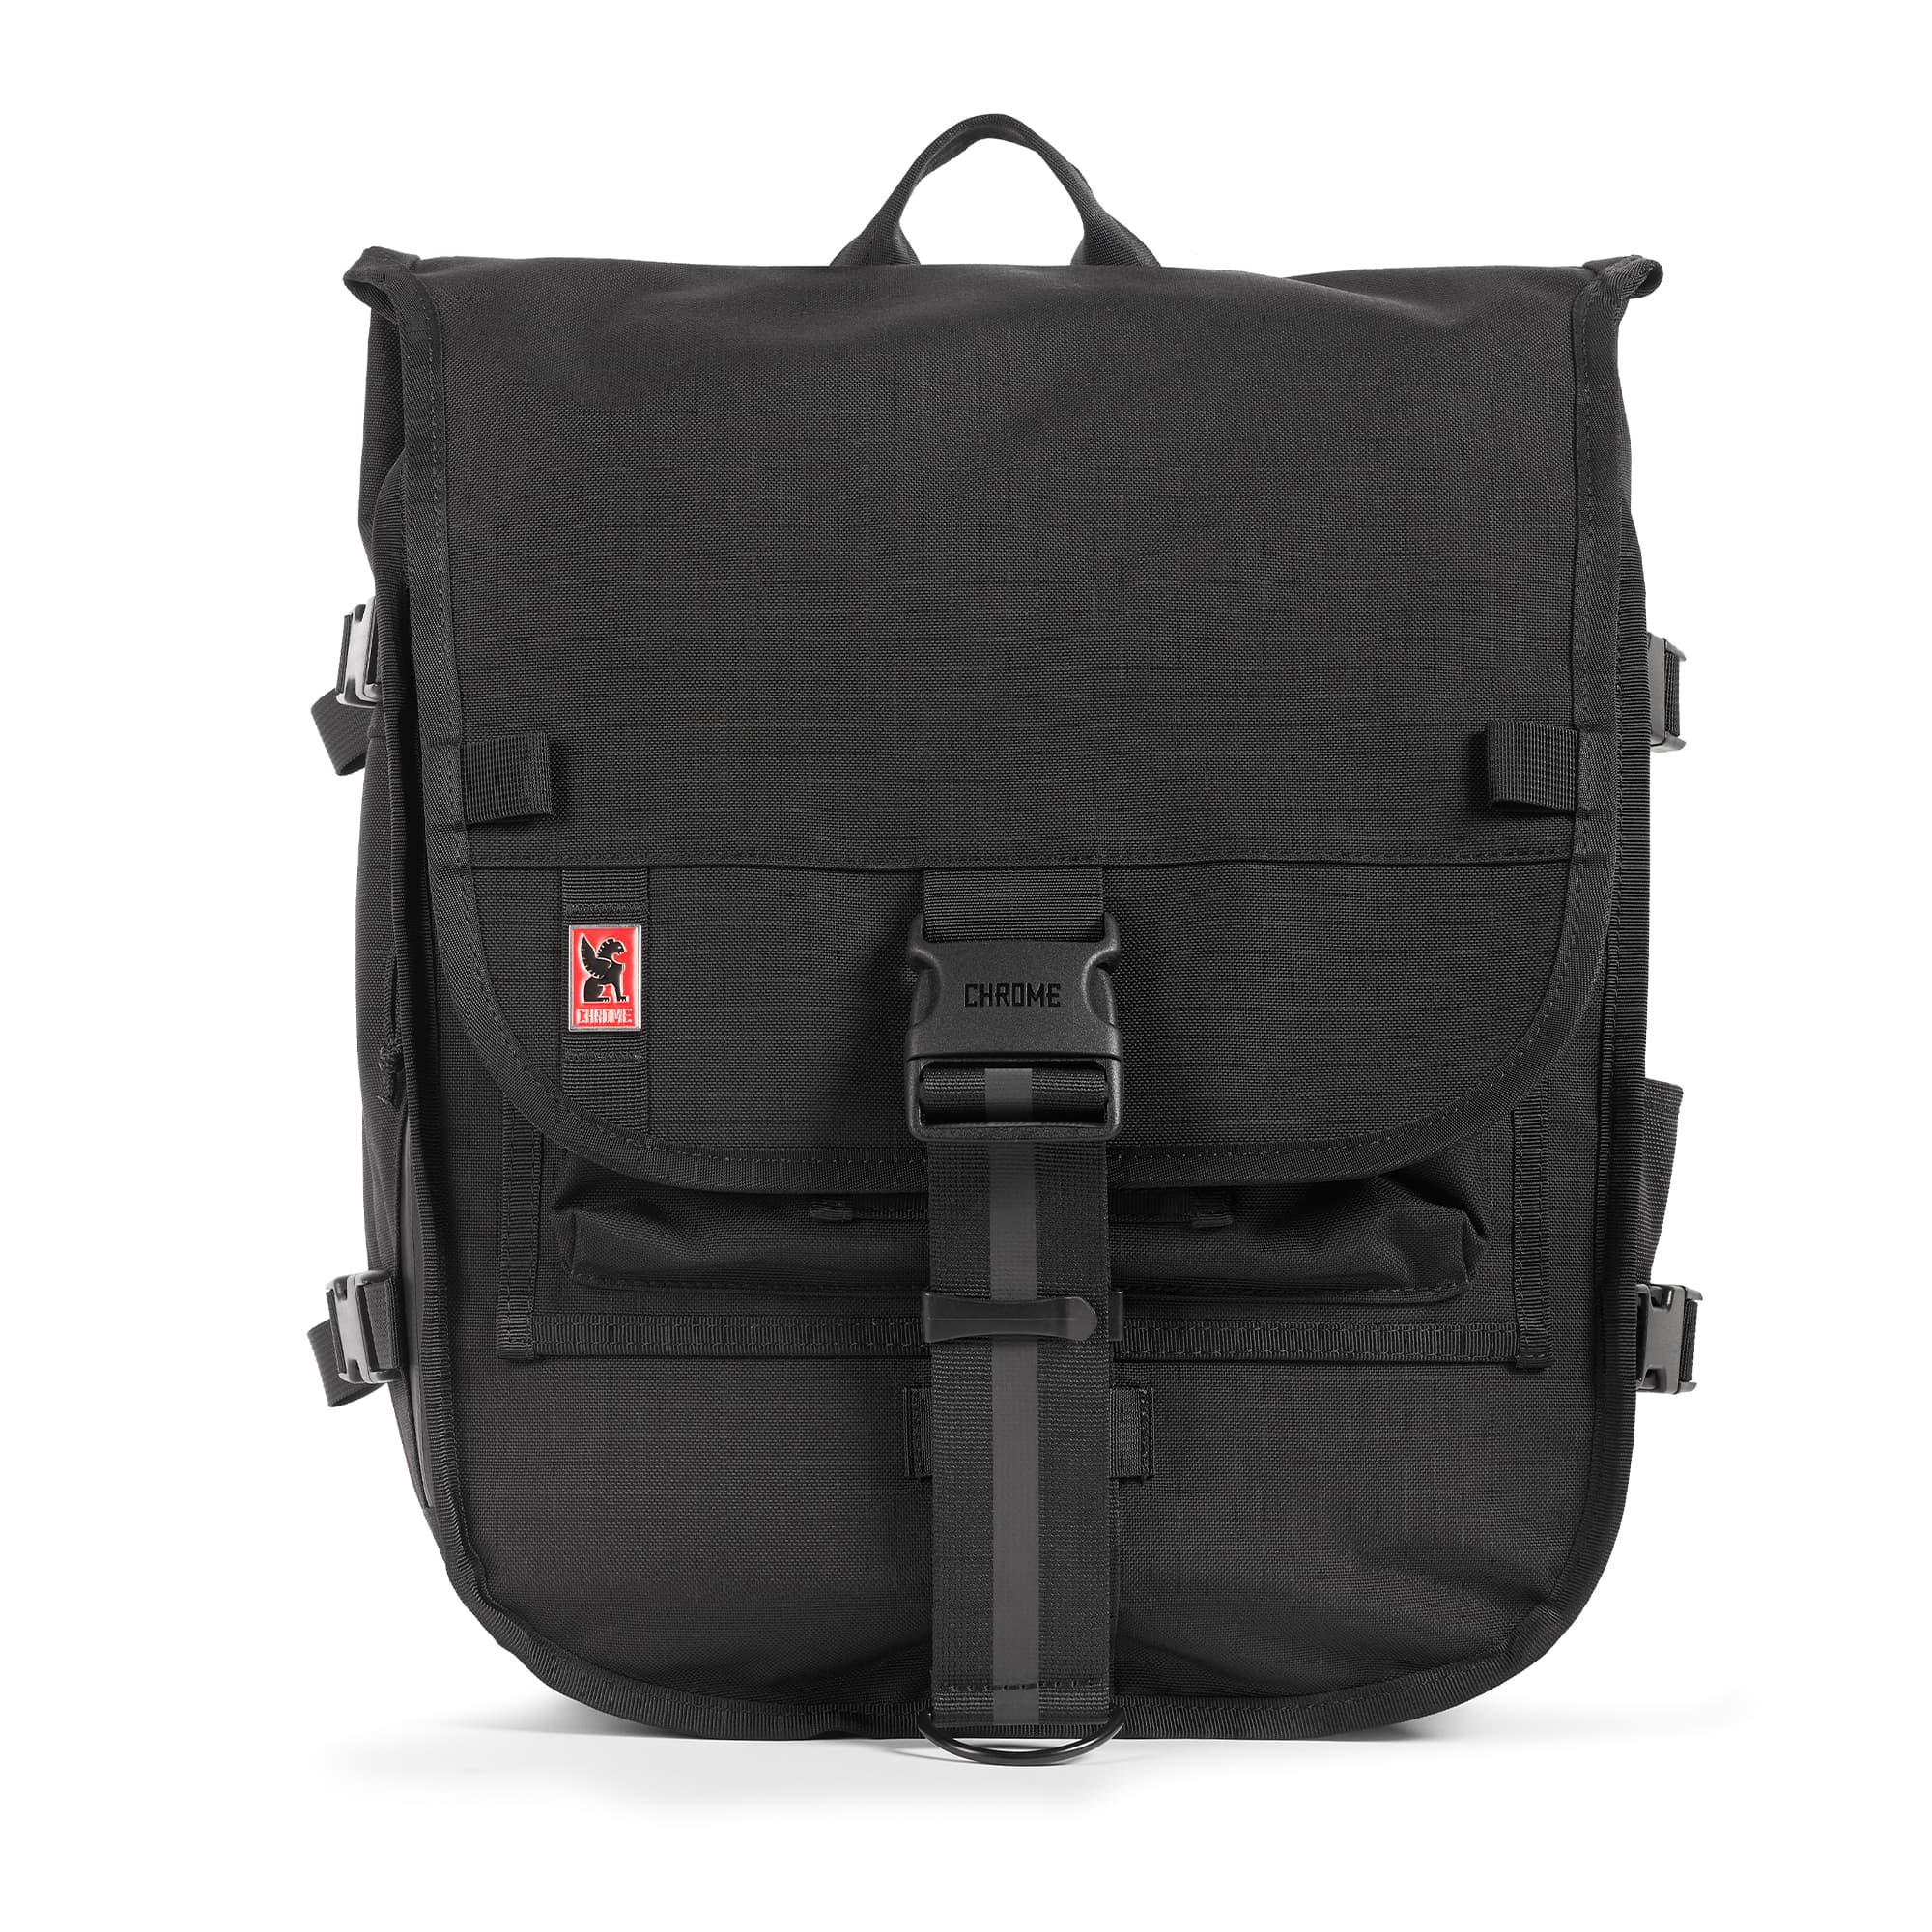 Warsaw medium size flap backpack in black full on front view